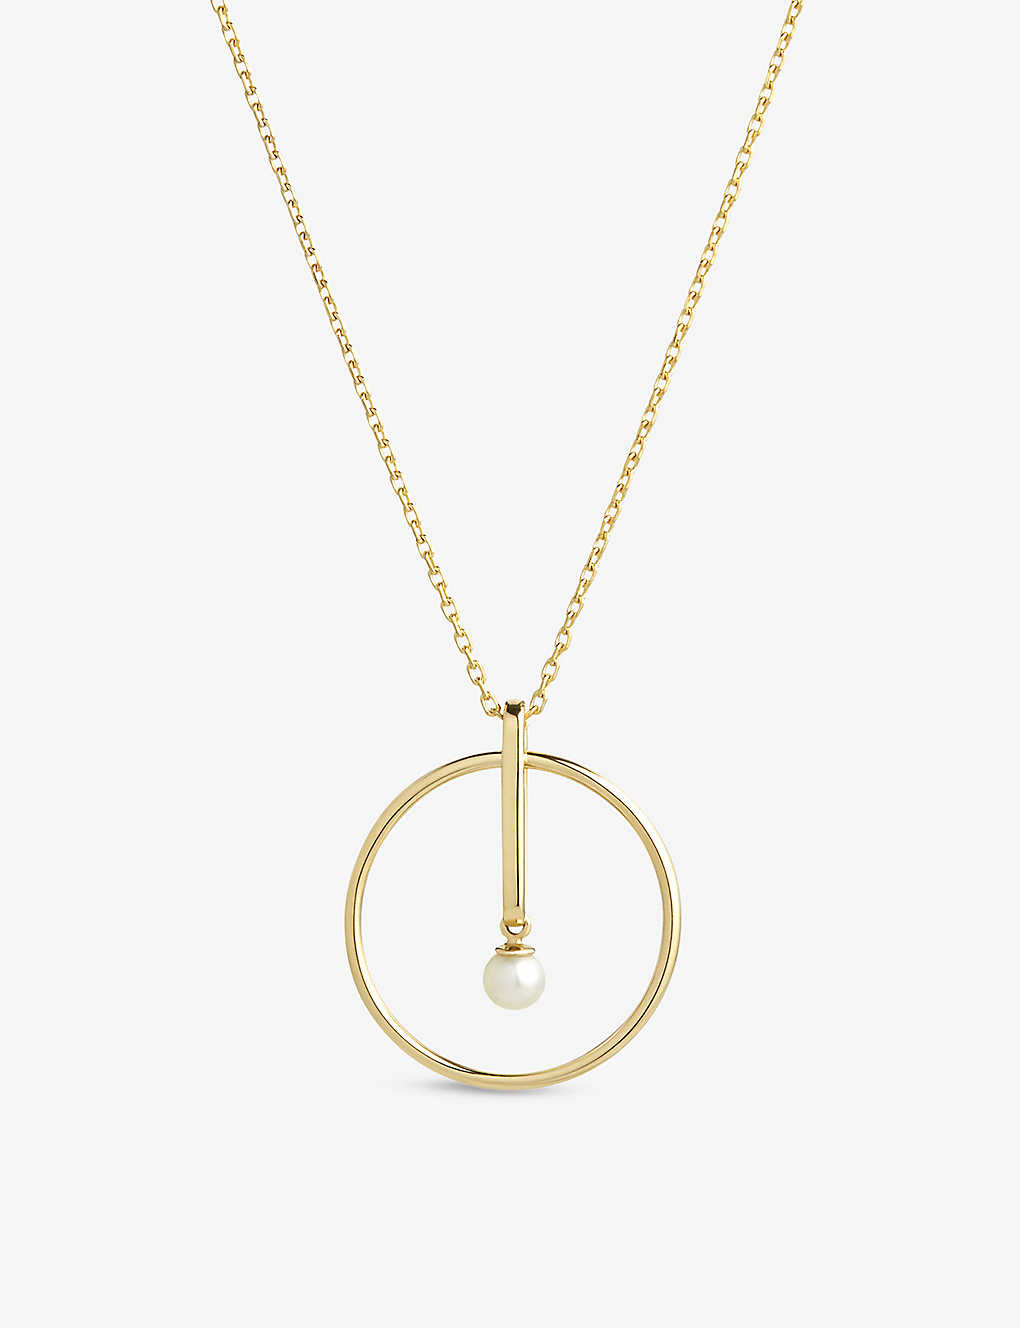 The Alkemistry Ruifier Astra Moonlight 18ct Yellow-gold And Akoya Pearl Pendant Necklace In 18ct Yellow Gold